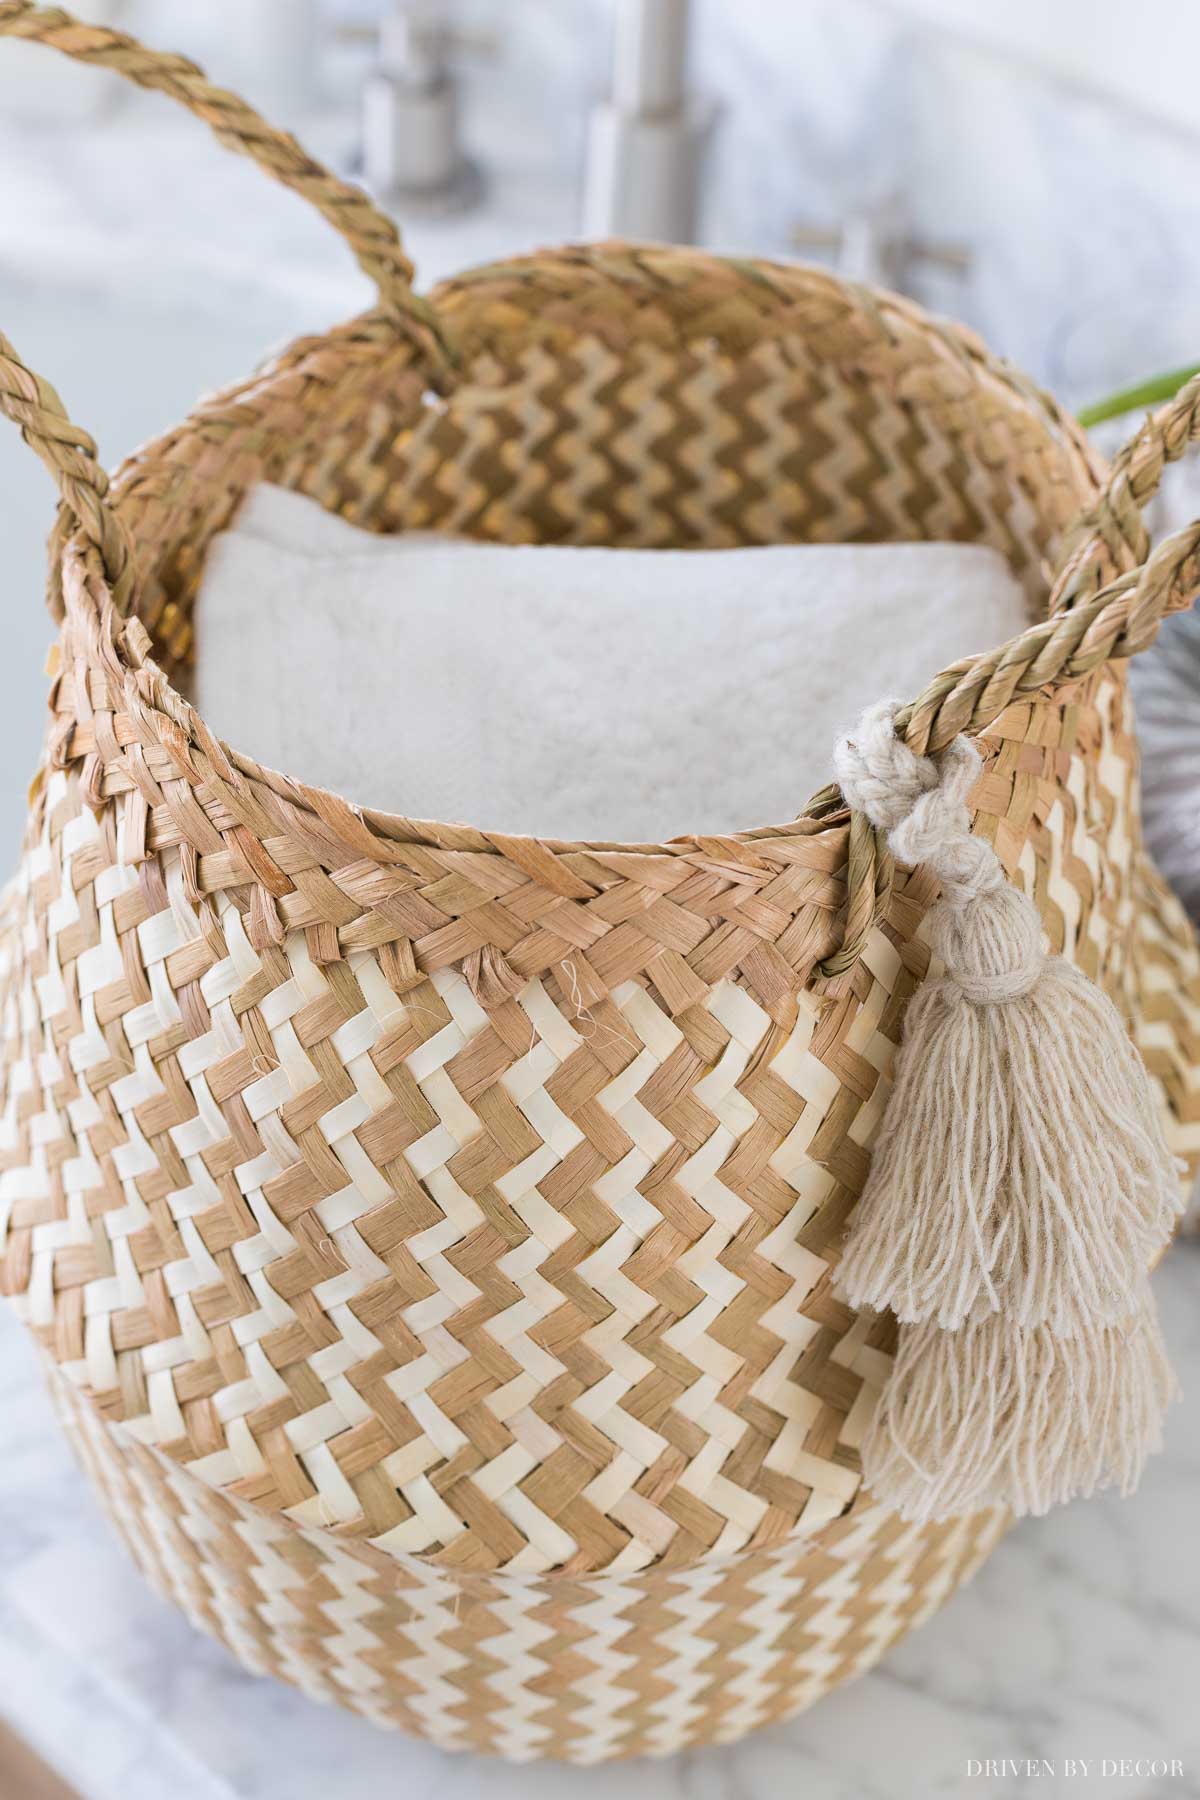 Love this cute basket holding wash cloths on the floating shelves in her master bathroom!